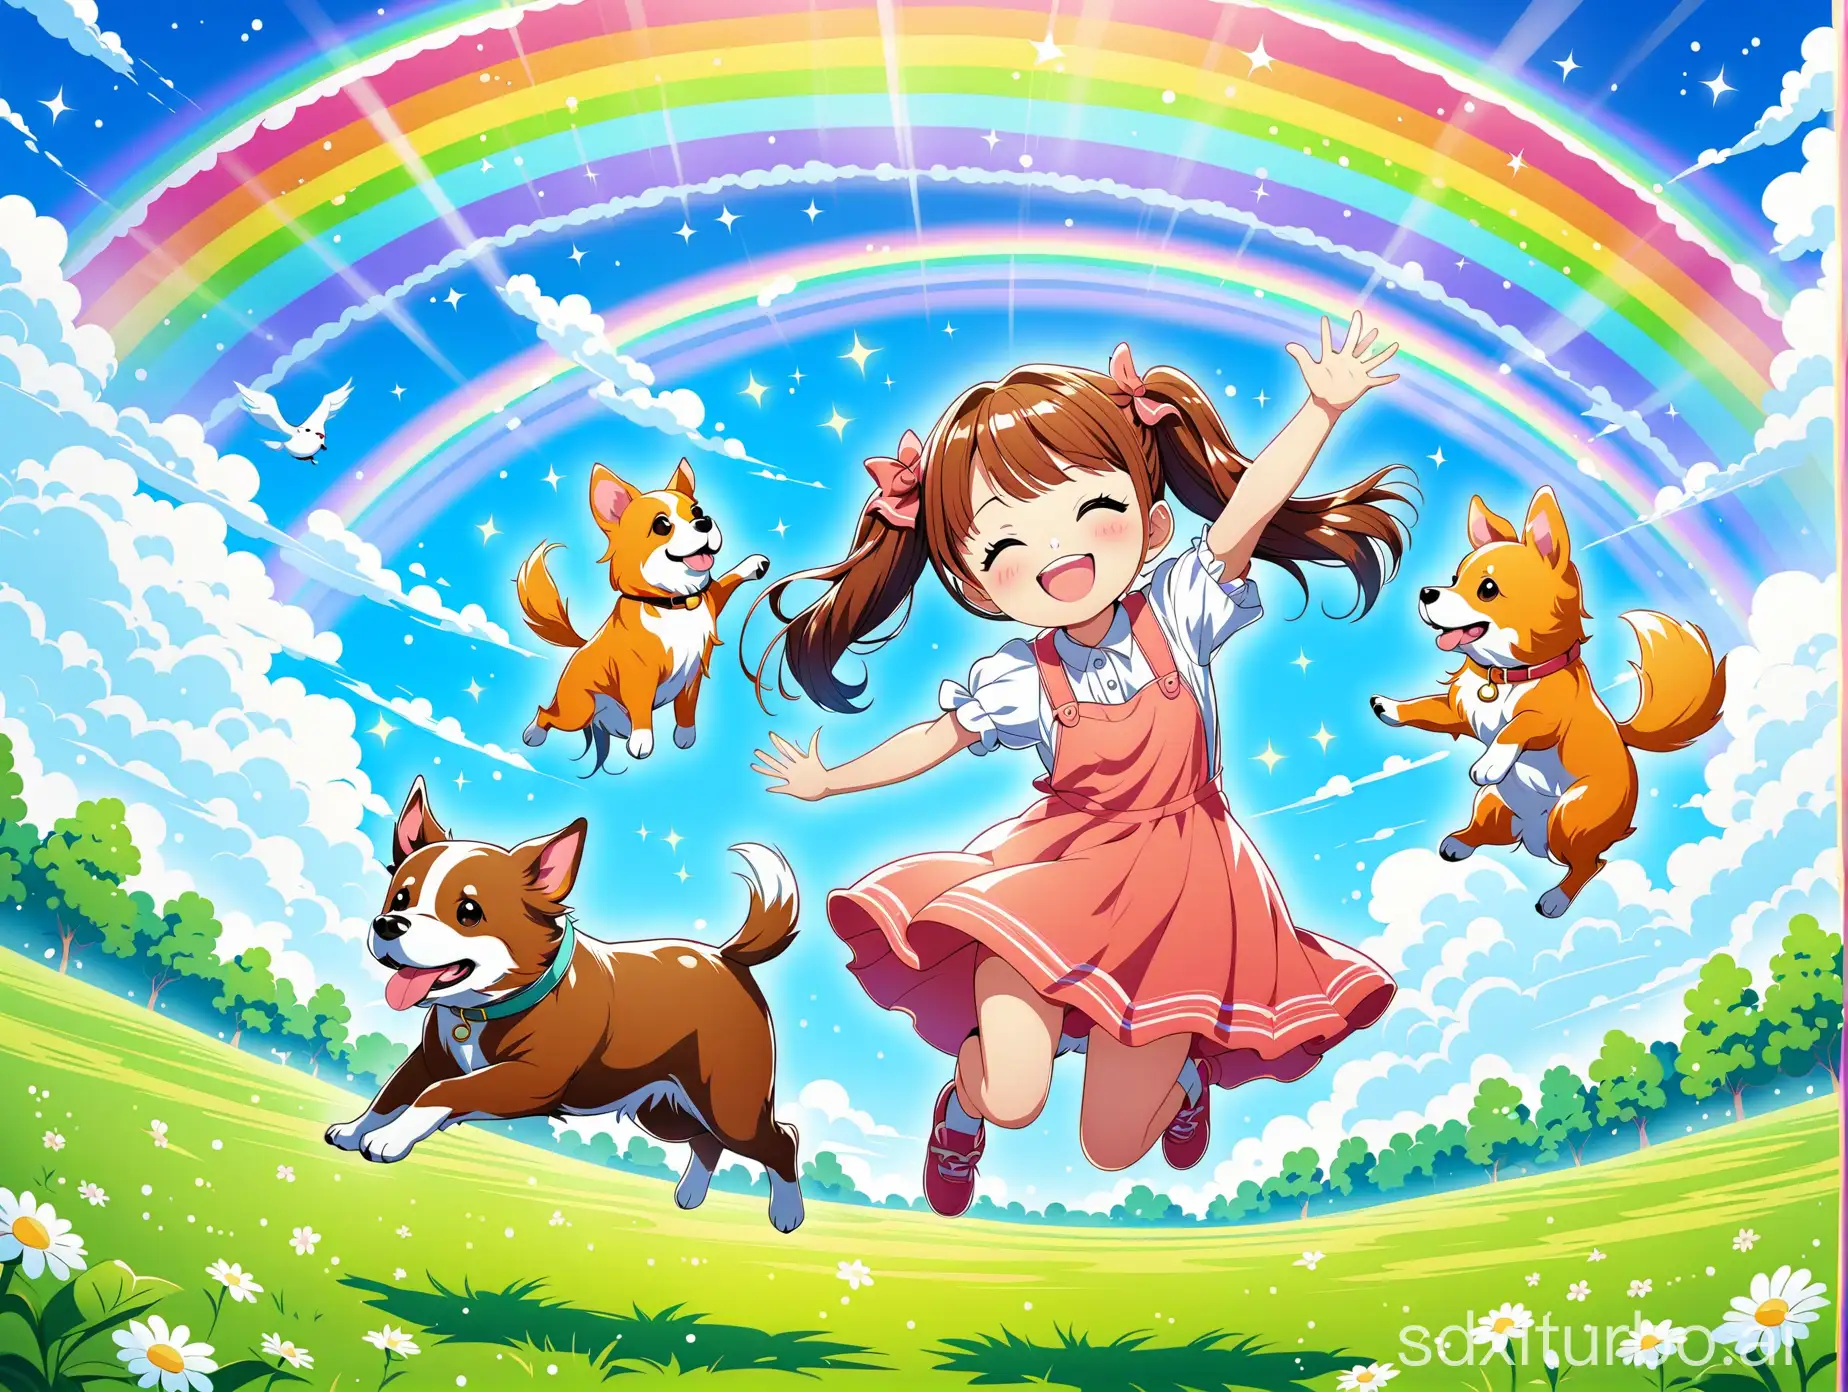 Joyful-Girl-with-Pigtails-and-Jumping-Dog-Under-Rainbow